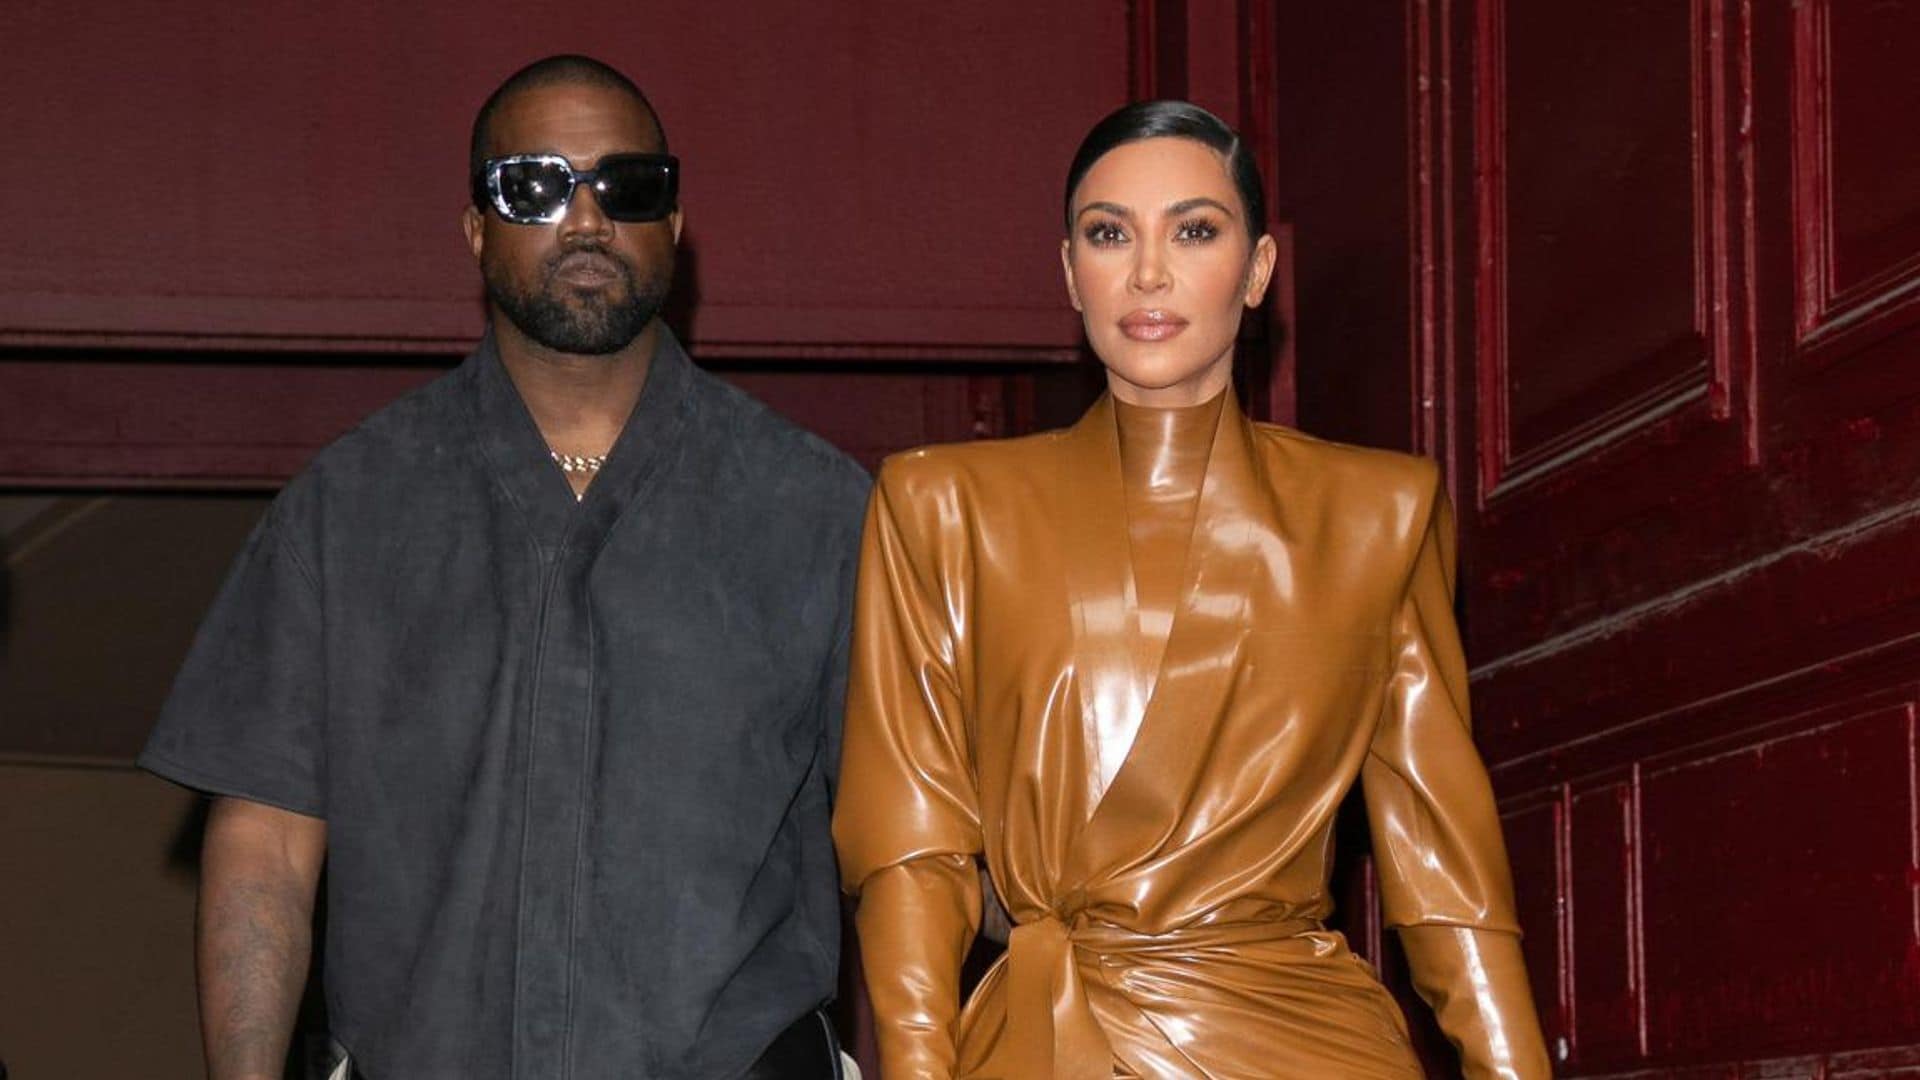 Kanye West and Kim Kardashian reunited over the weekend after living a part for months